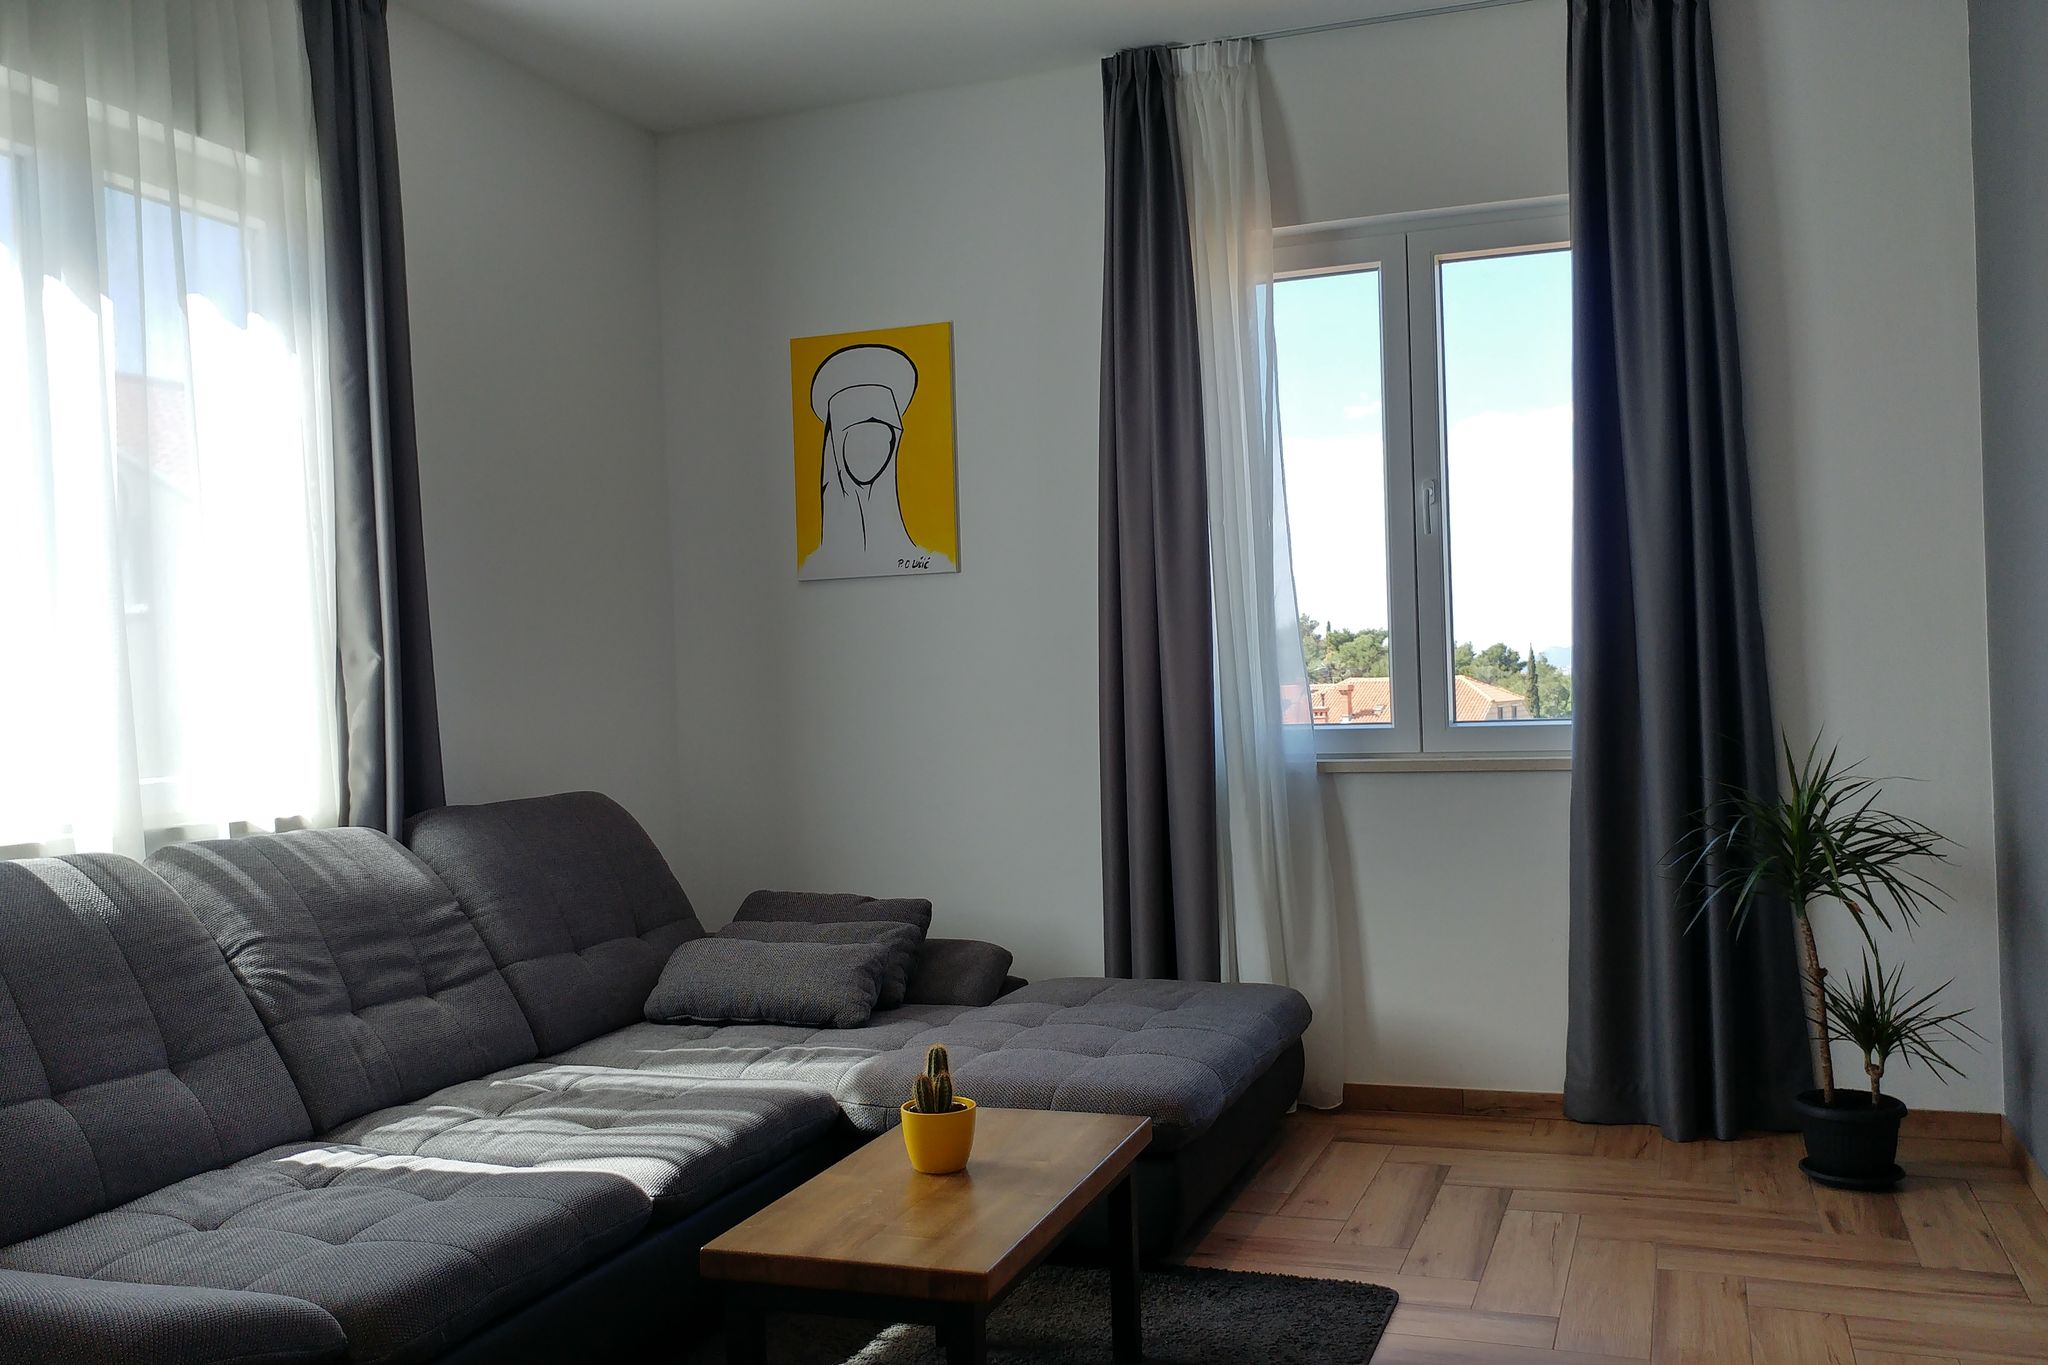 Comfortable new apartment with balcony sea view in quiet location, free parking